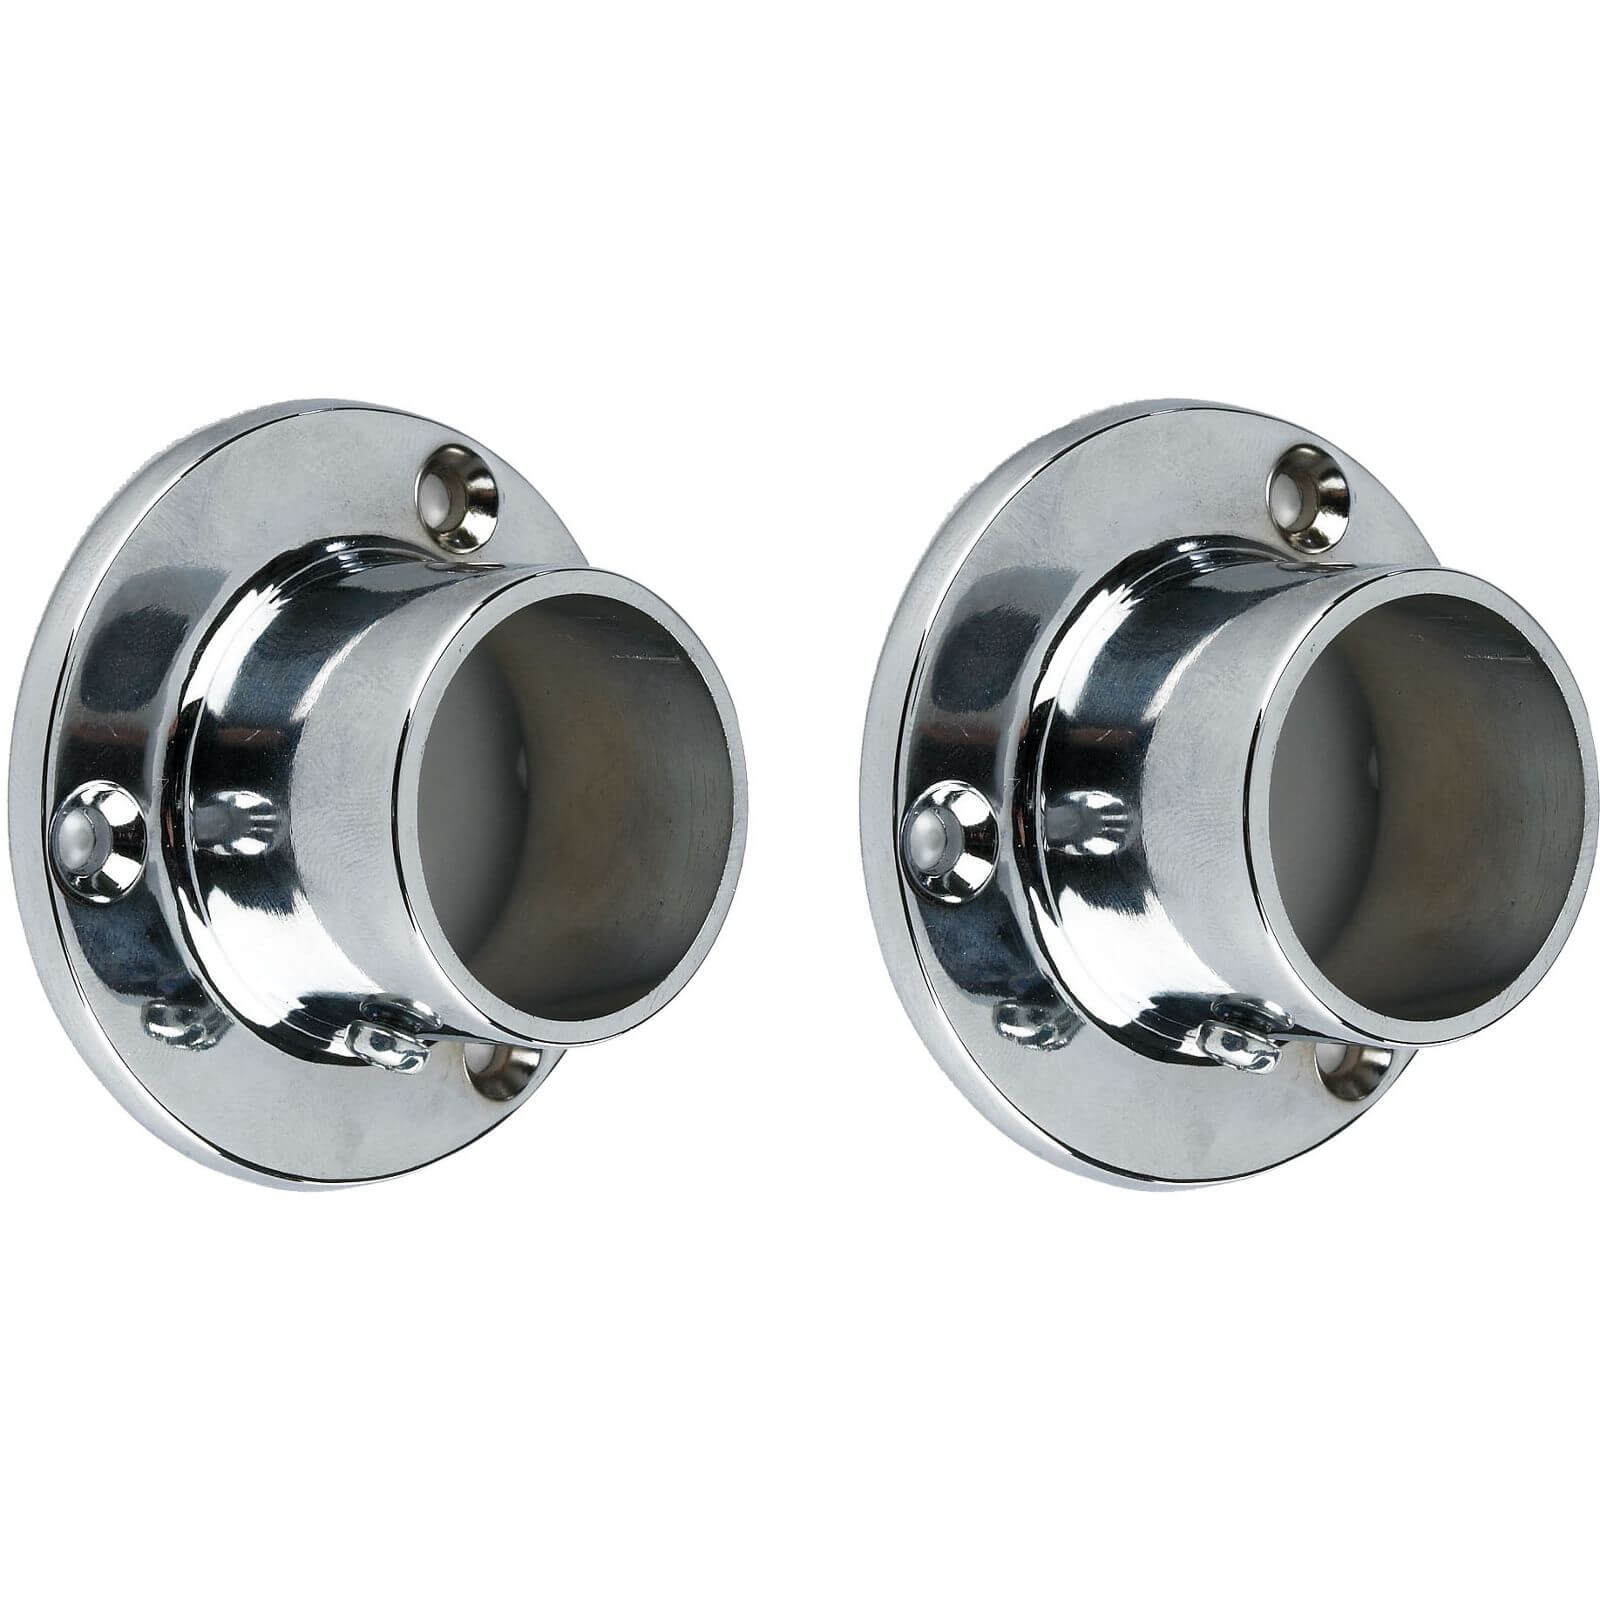 Super Deluxe Sockets - Chrome Plated - 32mm